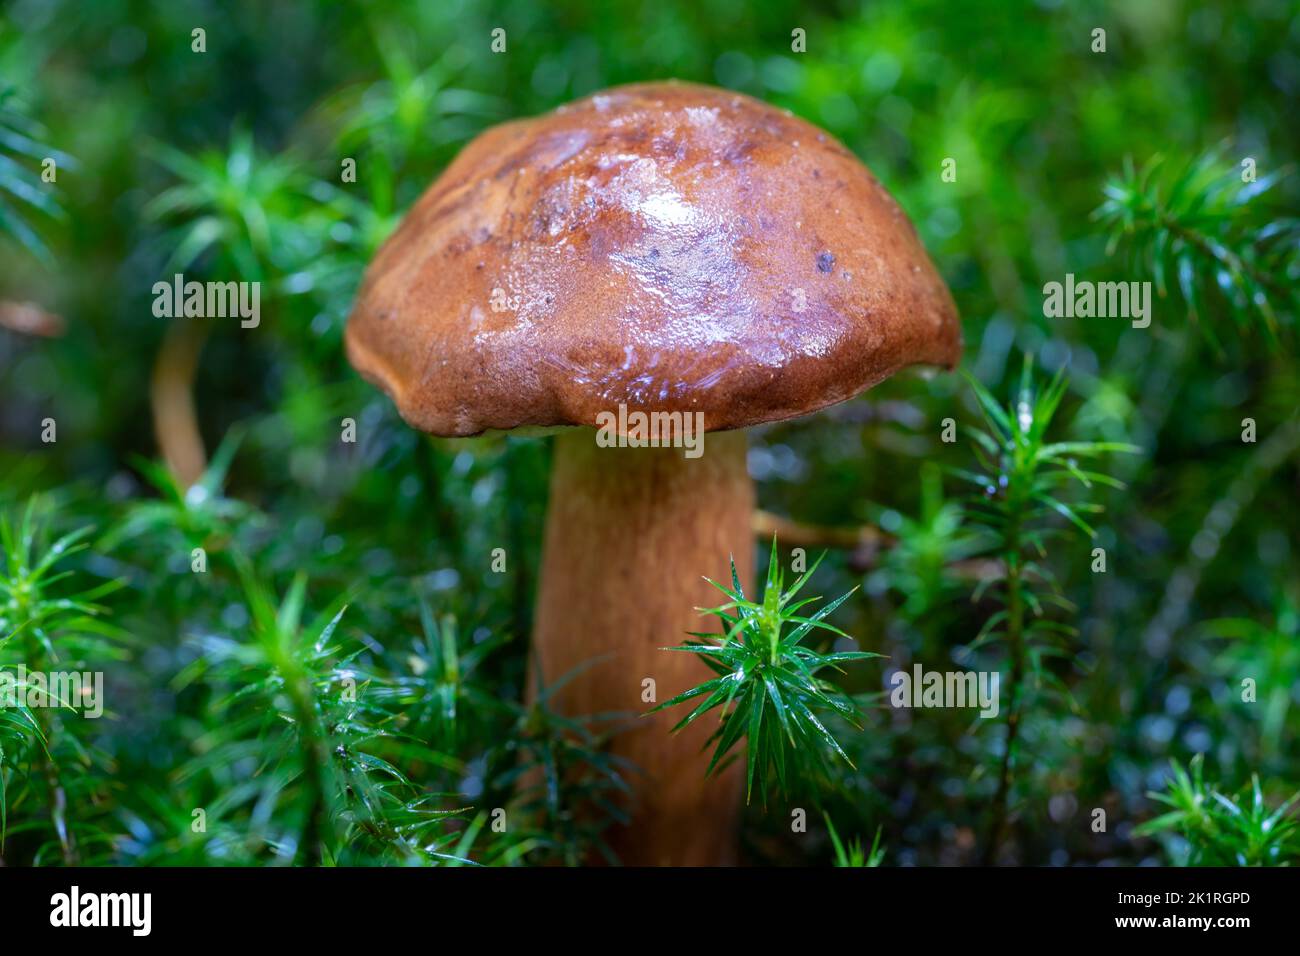 Chestnut mushroom on moss in the forest Stock Photo